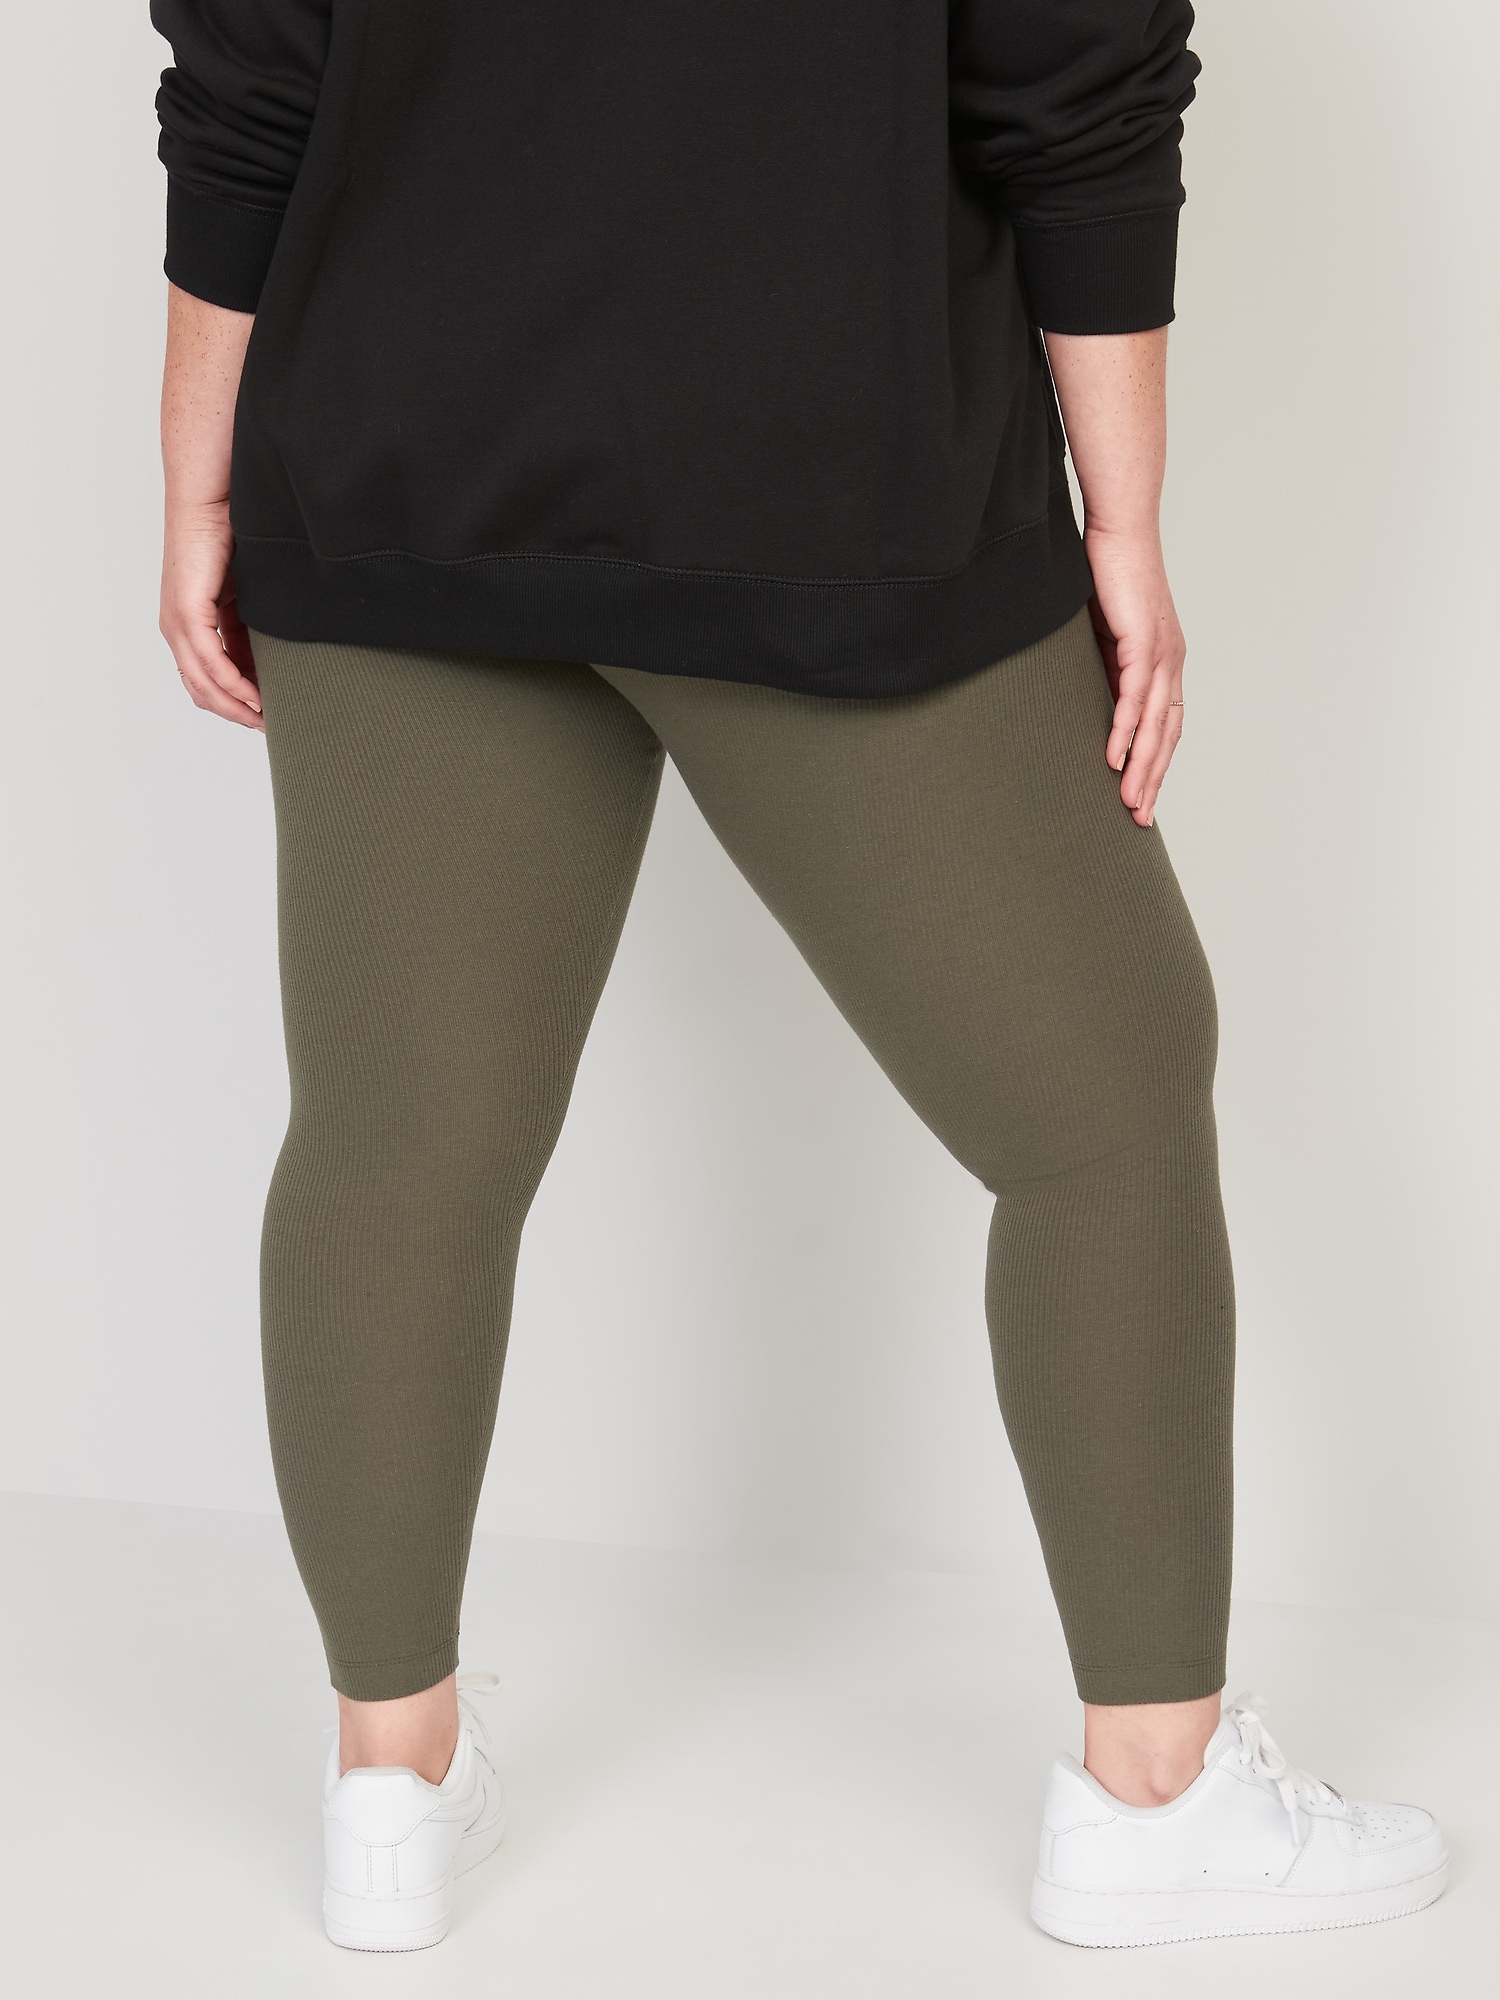 Buy U R YOU Green Plus Size Solid Ankle Length Cotton Lycra Women's Leggings  | Shoppers Stop